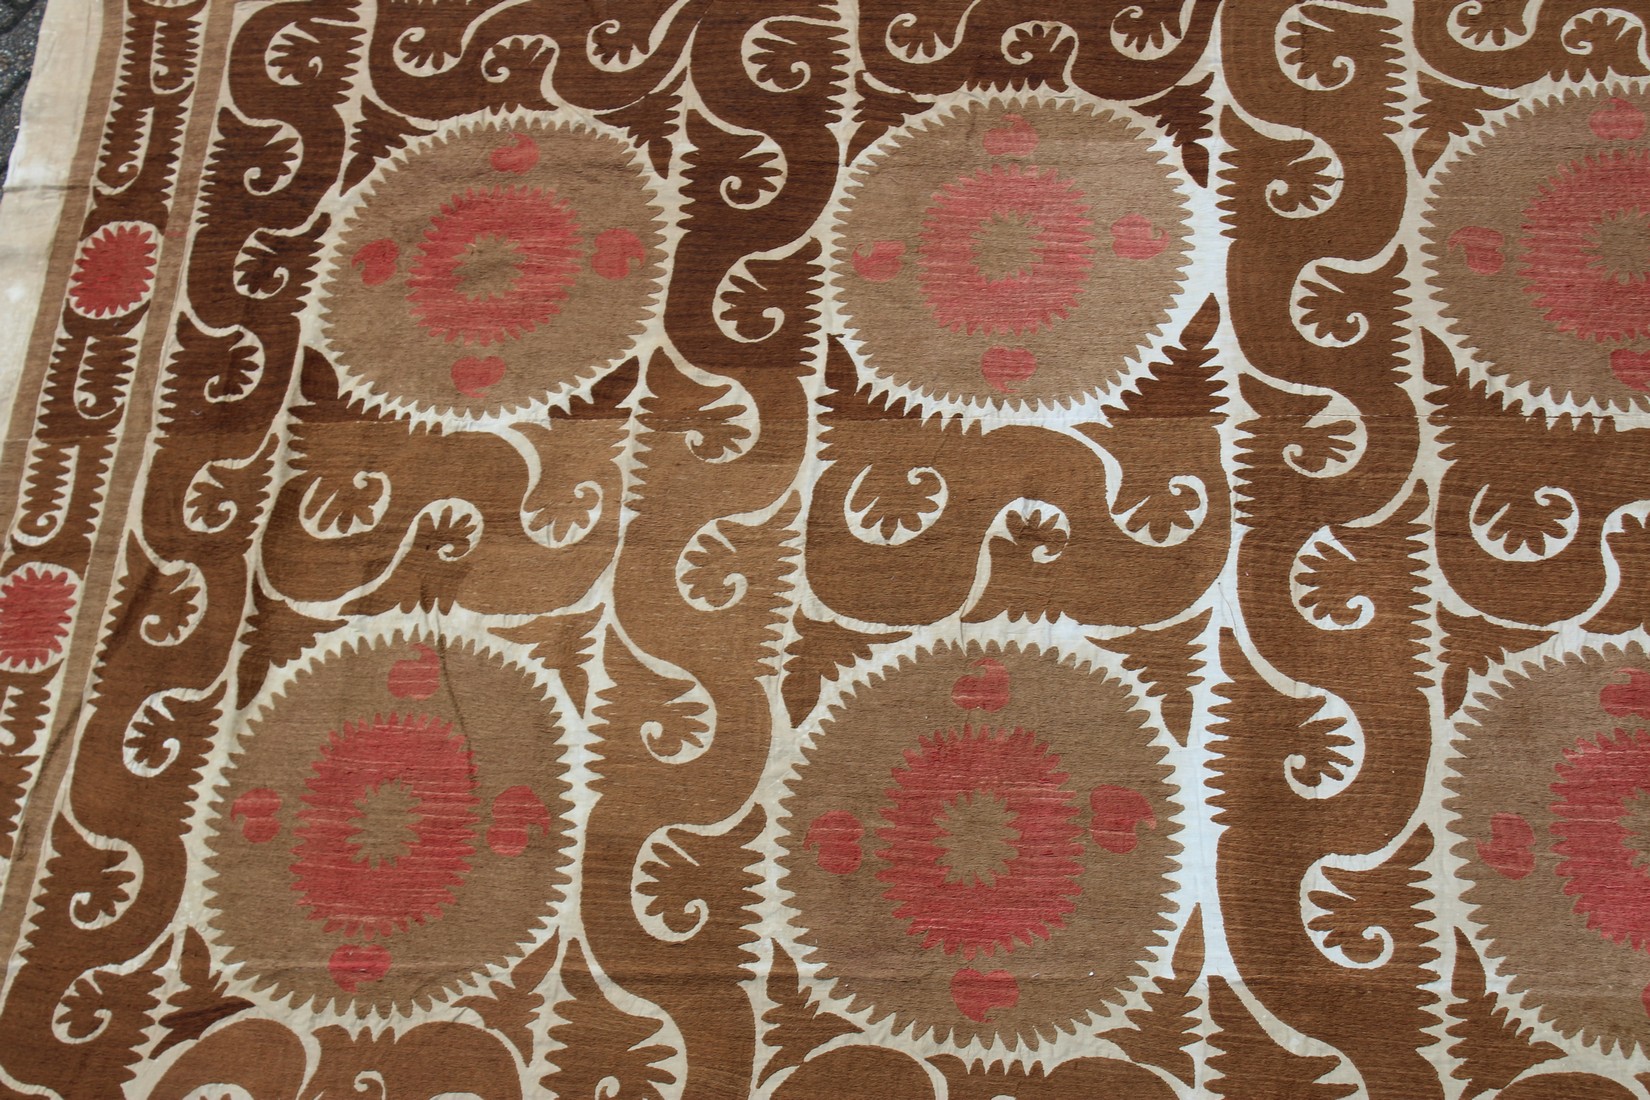 A VERY LARGE 20TH CENTURY SAMARKAND UZBEKISTAN WEDDING SUZANI TEXTILE, in light browns and reds on - Image 4 of 8